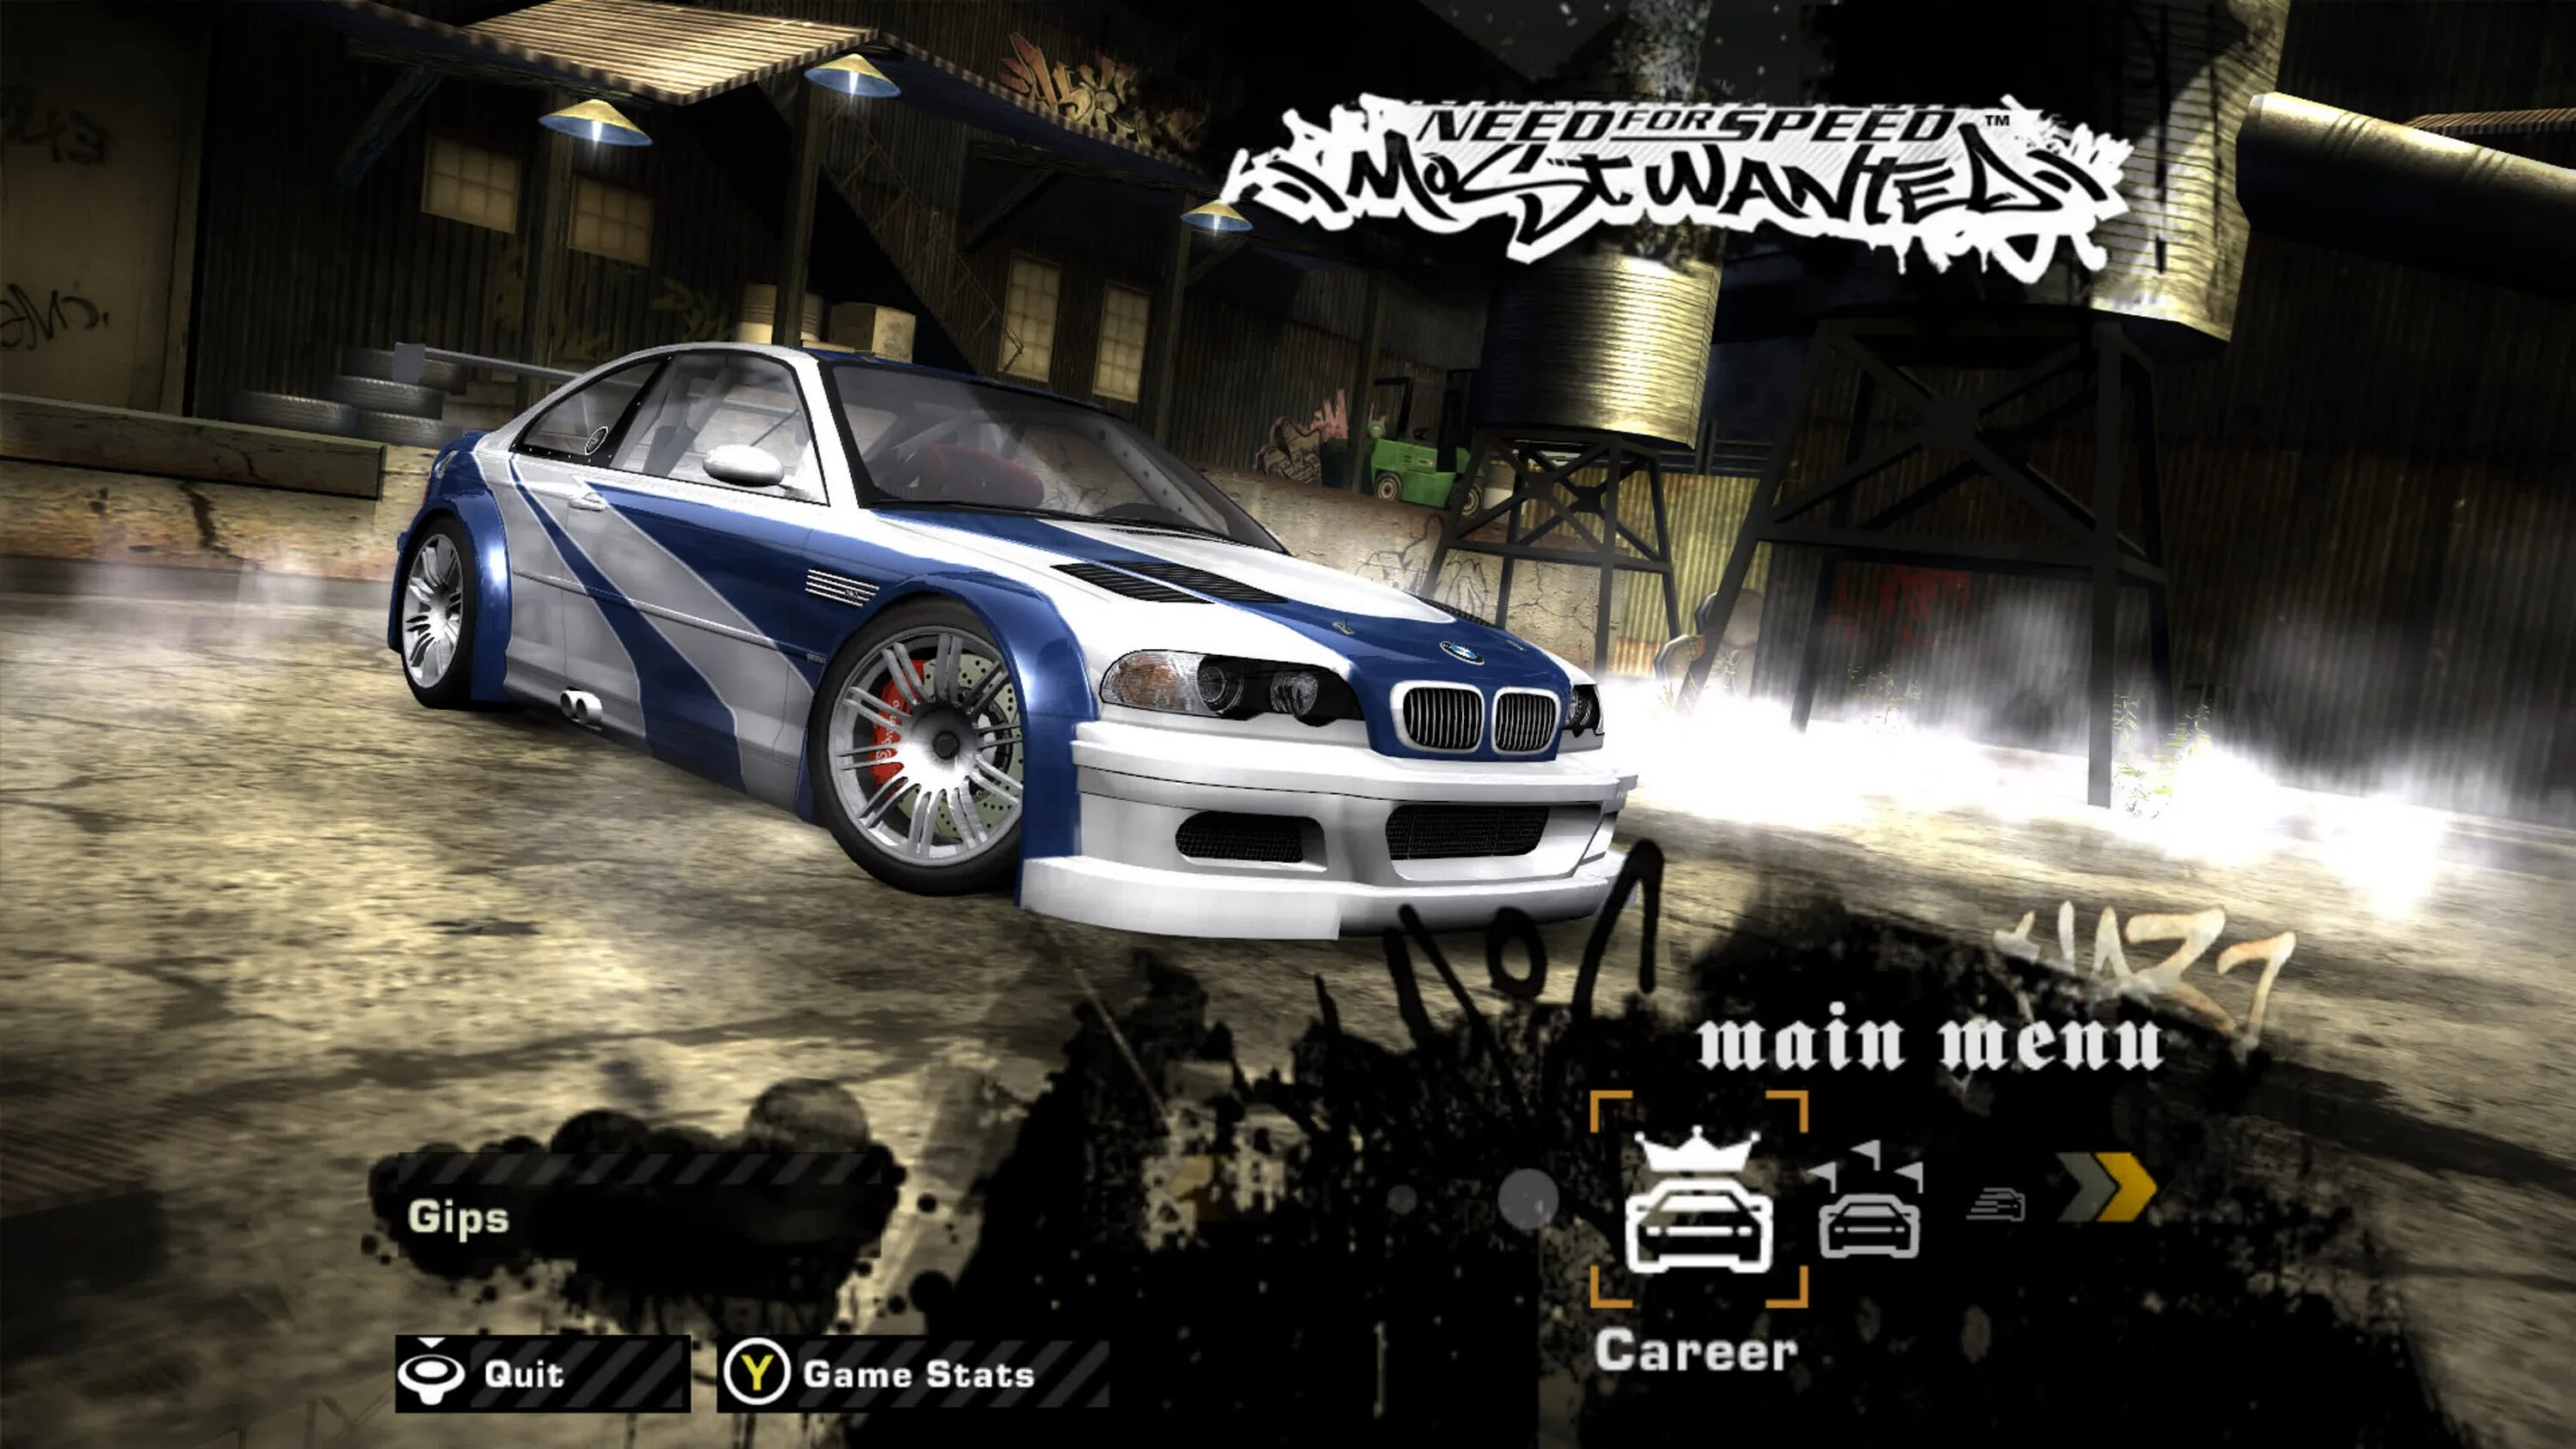 Need for Speed most wanted главное меню. NFS most wanted 2005 диск. Need for Speed меню. Need for Speed for Speed меню.